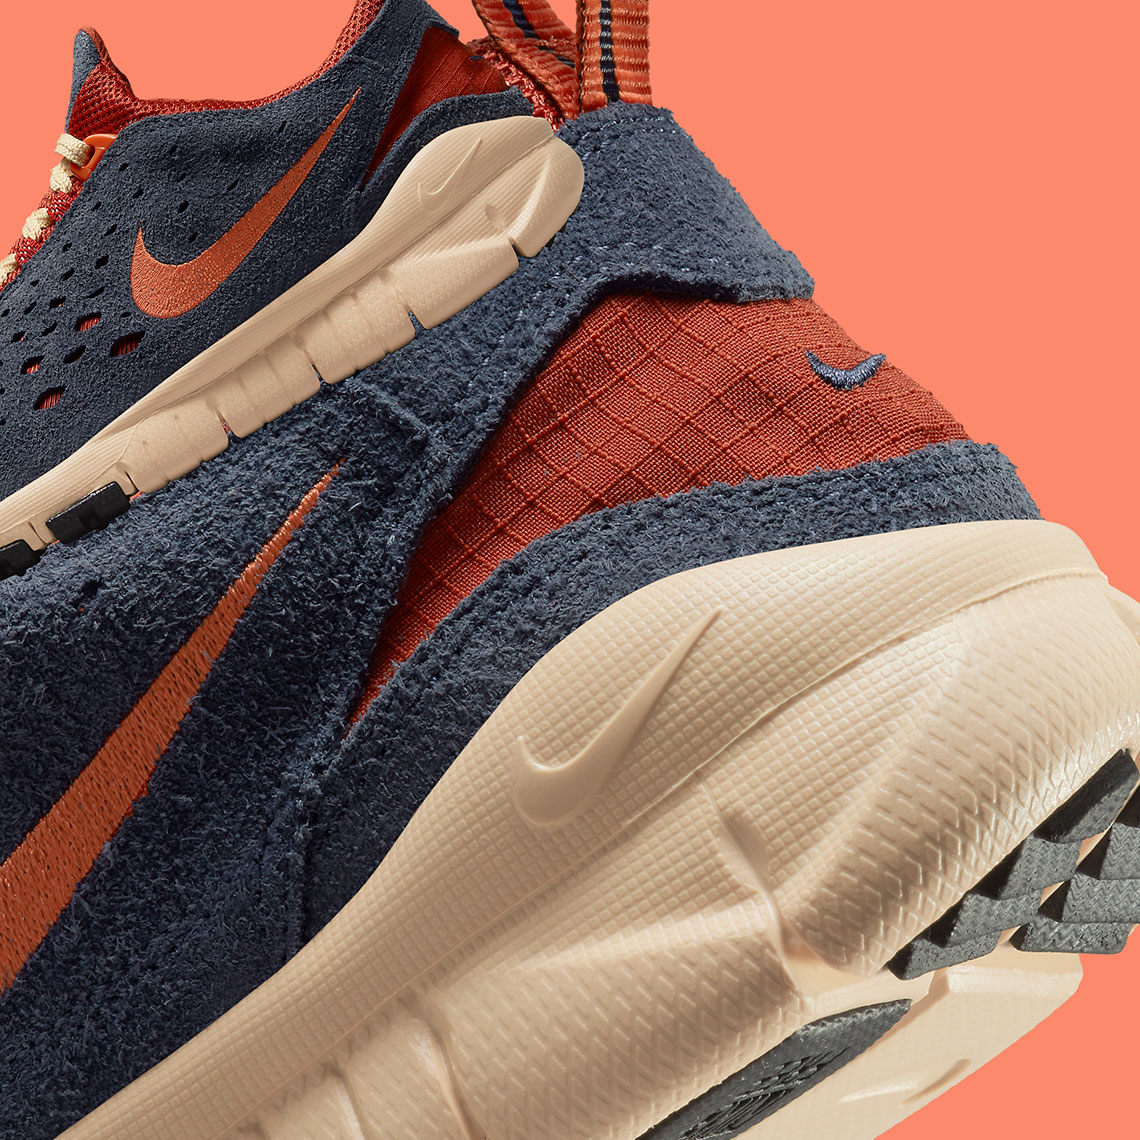 nike shoes for men price 1000 feet to miles hour Trail Thunder Blue Orange Cinnabar Canvas Cw5814 400 4